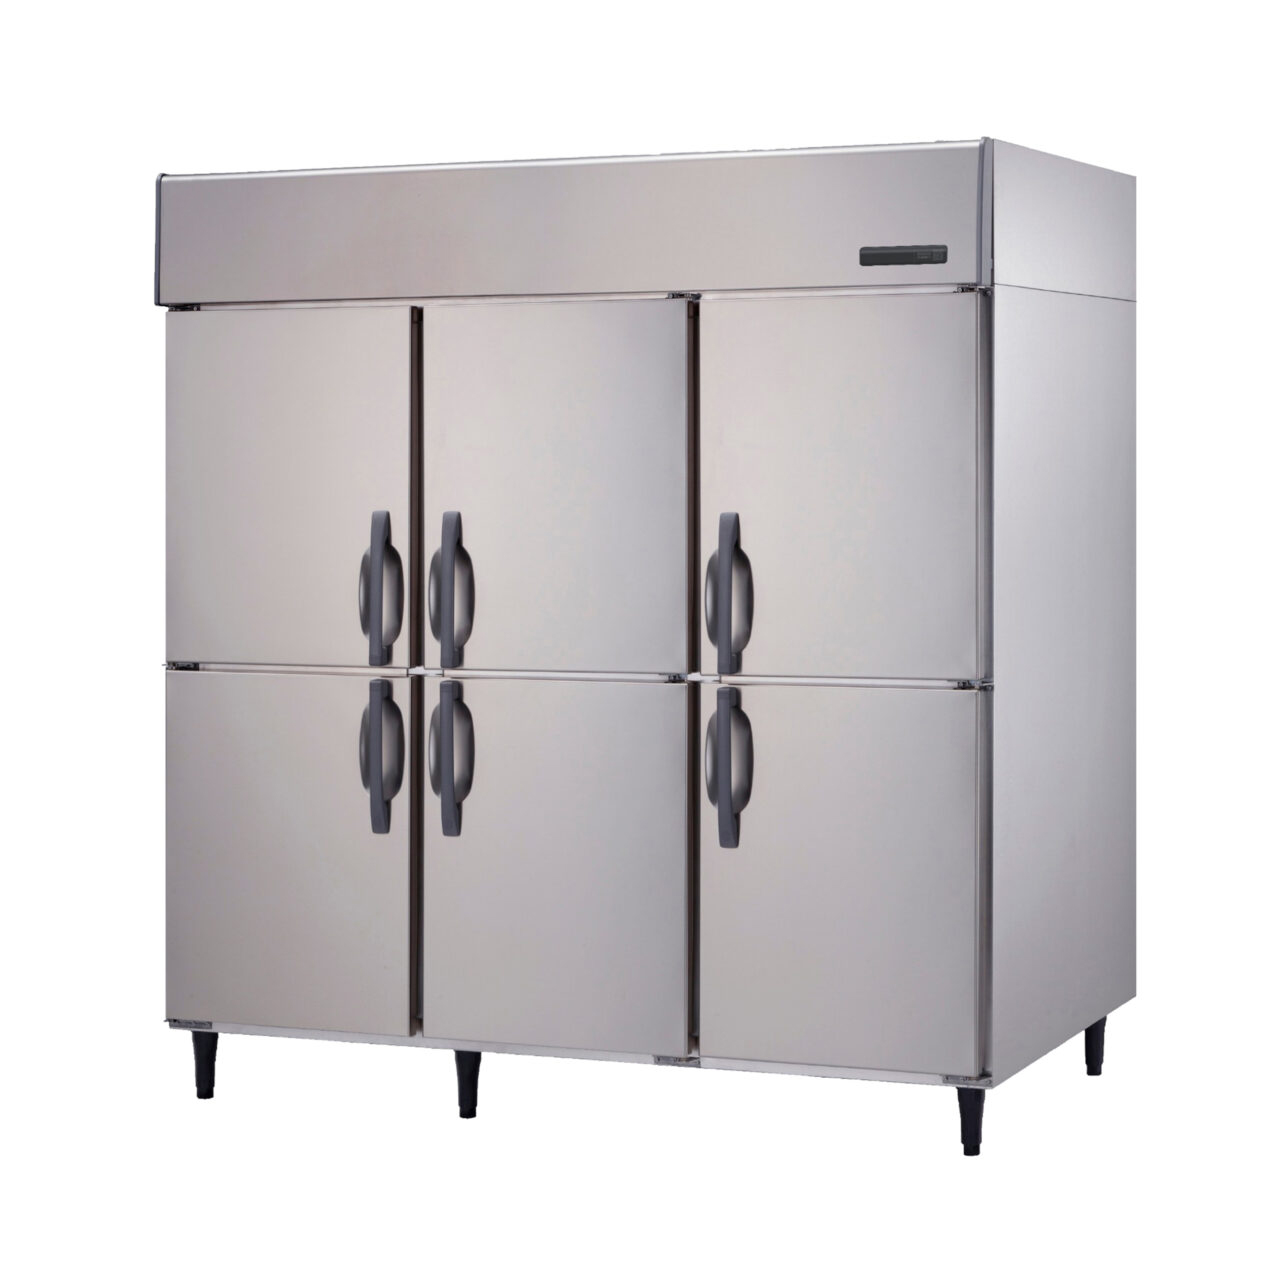 -6~12℃ Air Cooling 6 Solid Doors Upright Reach-in Refrigerator Commercial Refrigerator